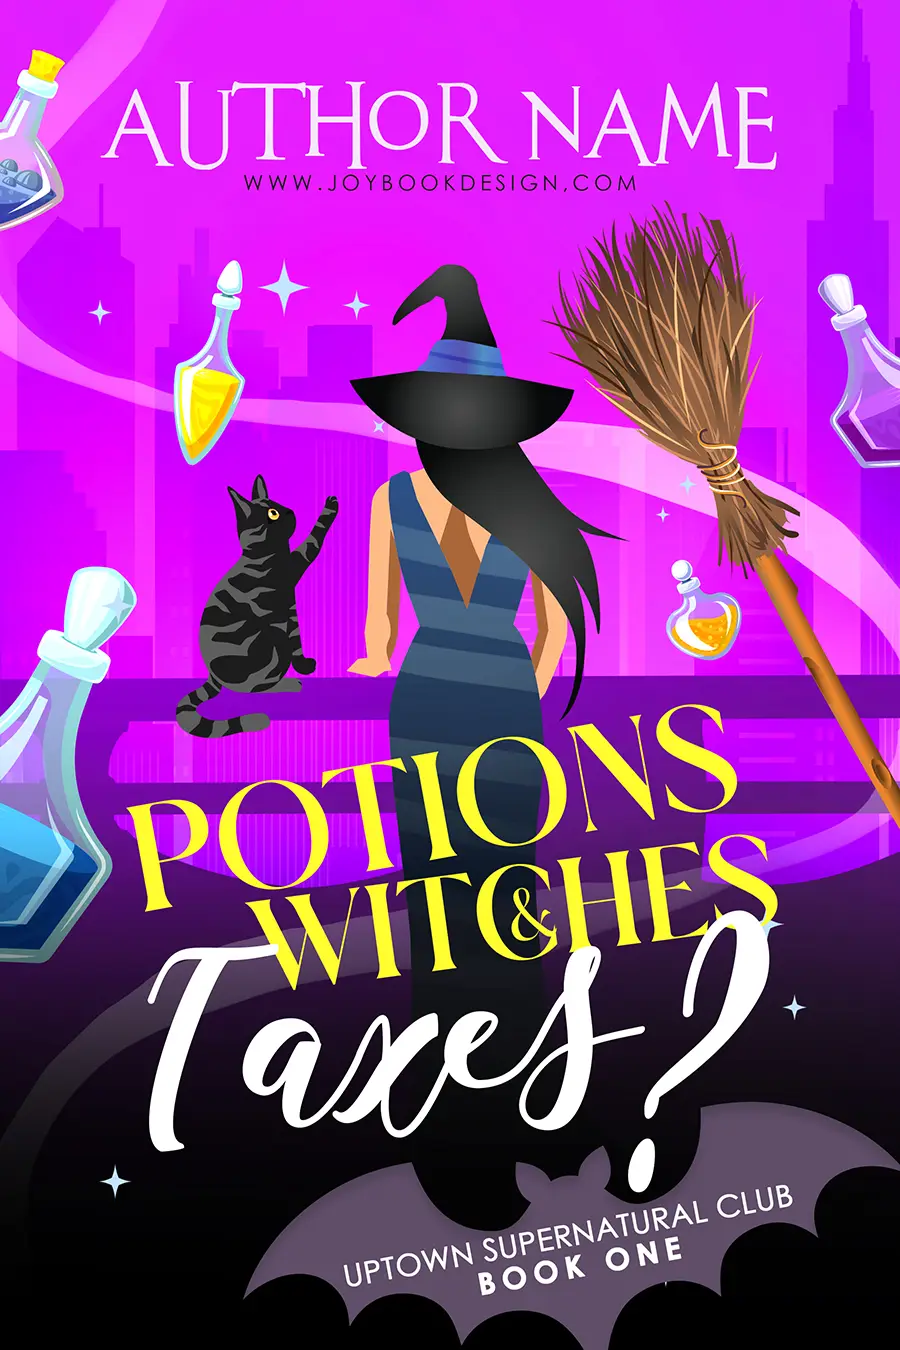 Potions, Witches & Taxes?